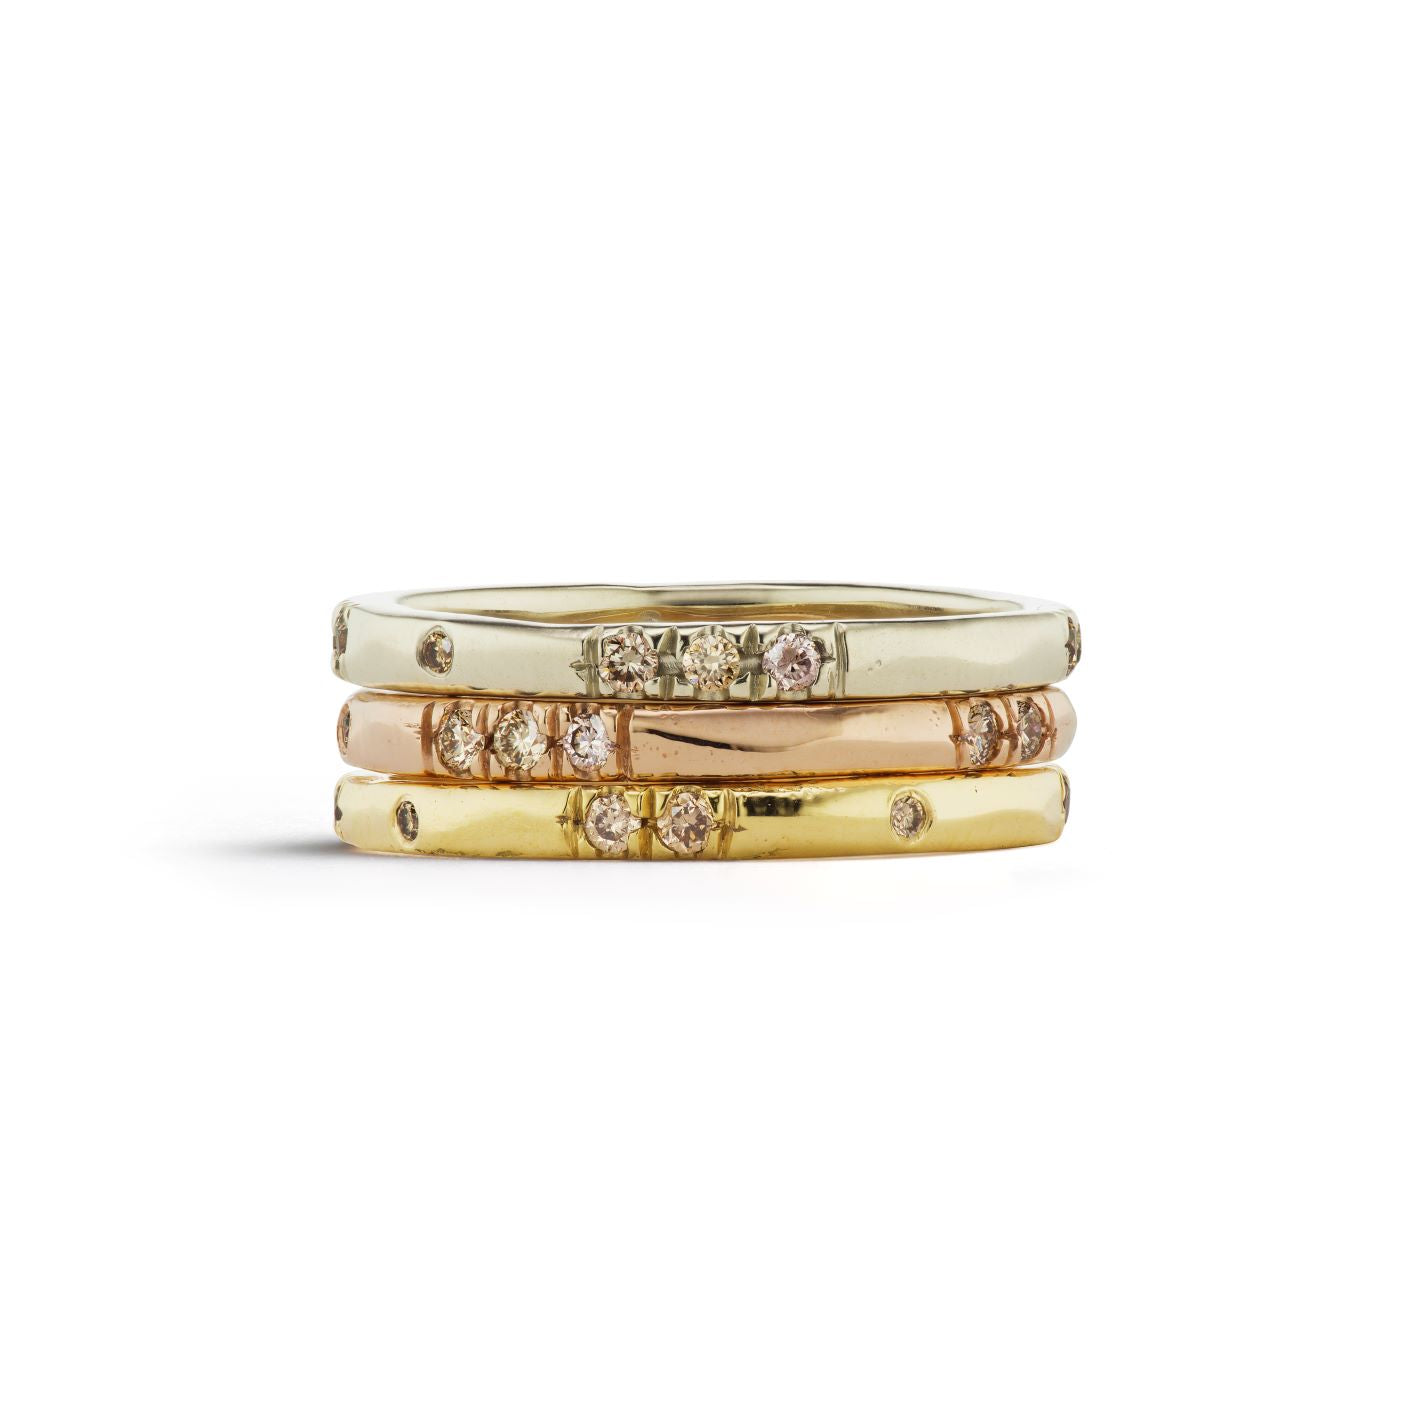 Sand Pave Band - Yellow Gold